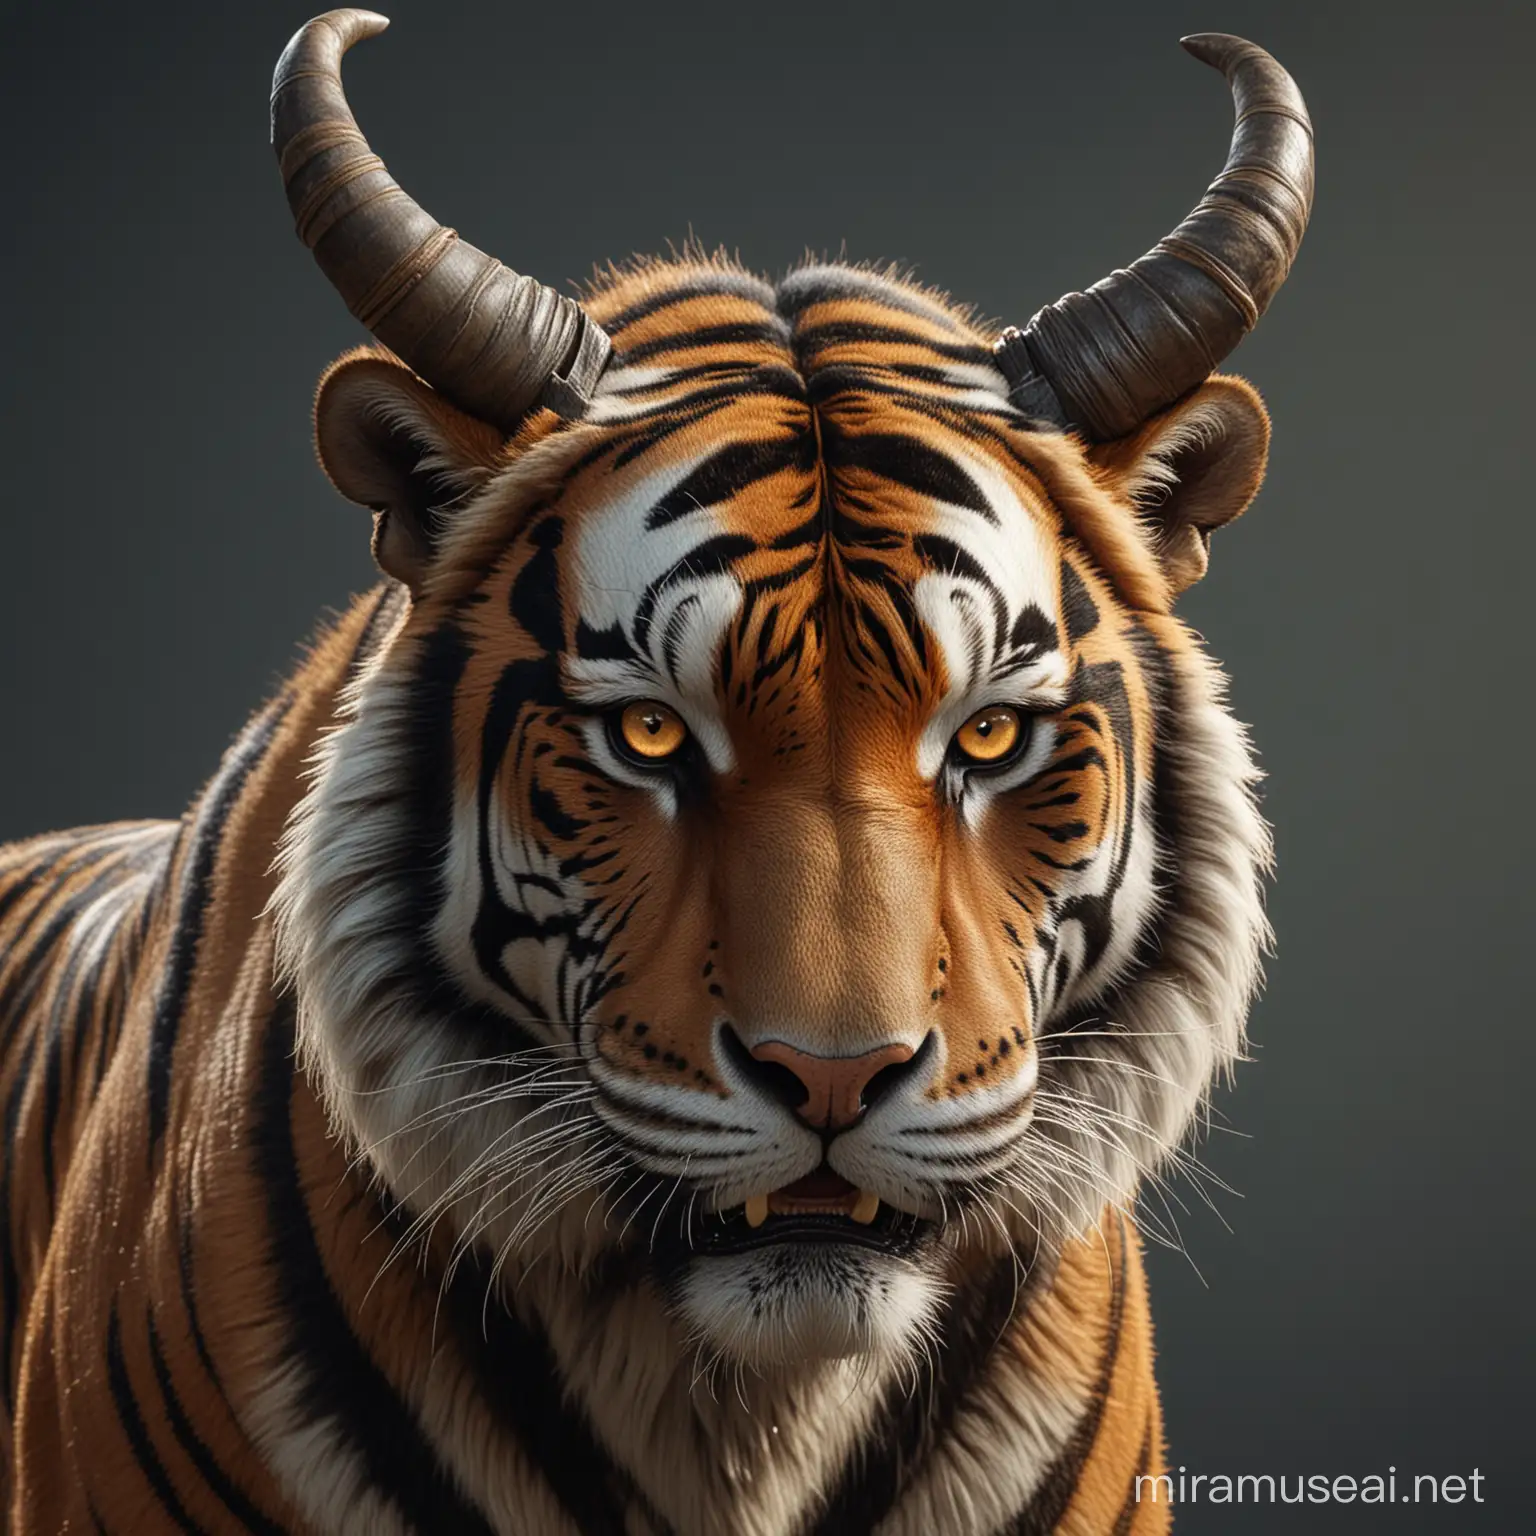 Cyber Tiger with Bull Horns in 5D Ultrarealistic Photo